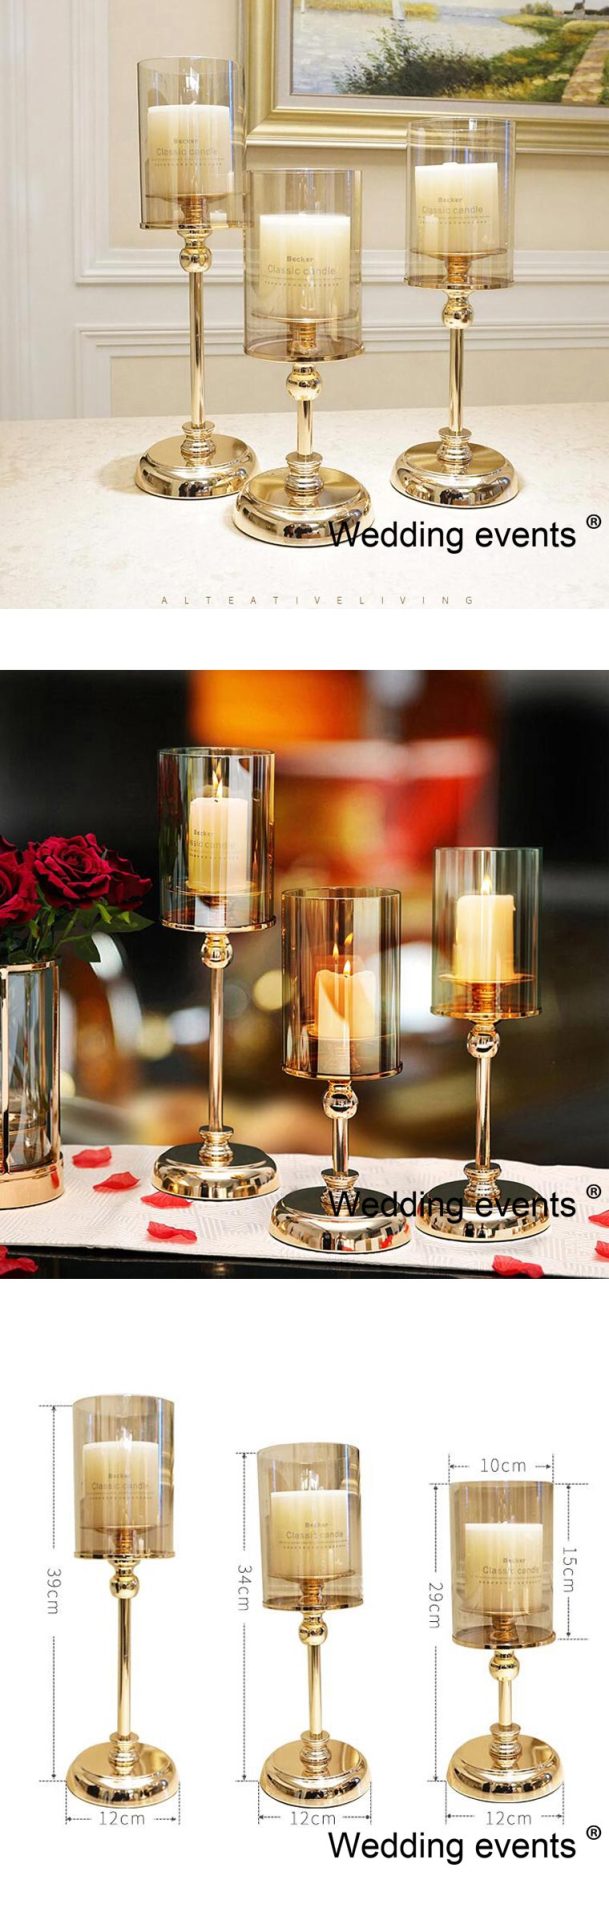 Candle Sticks For Wedding